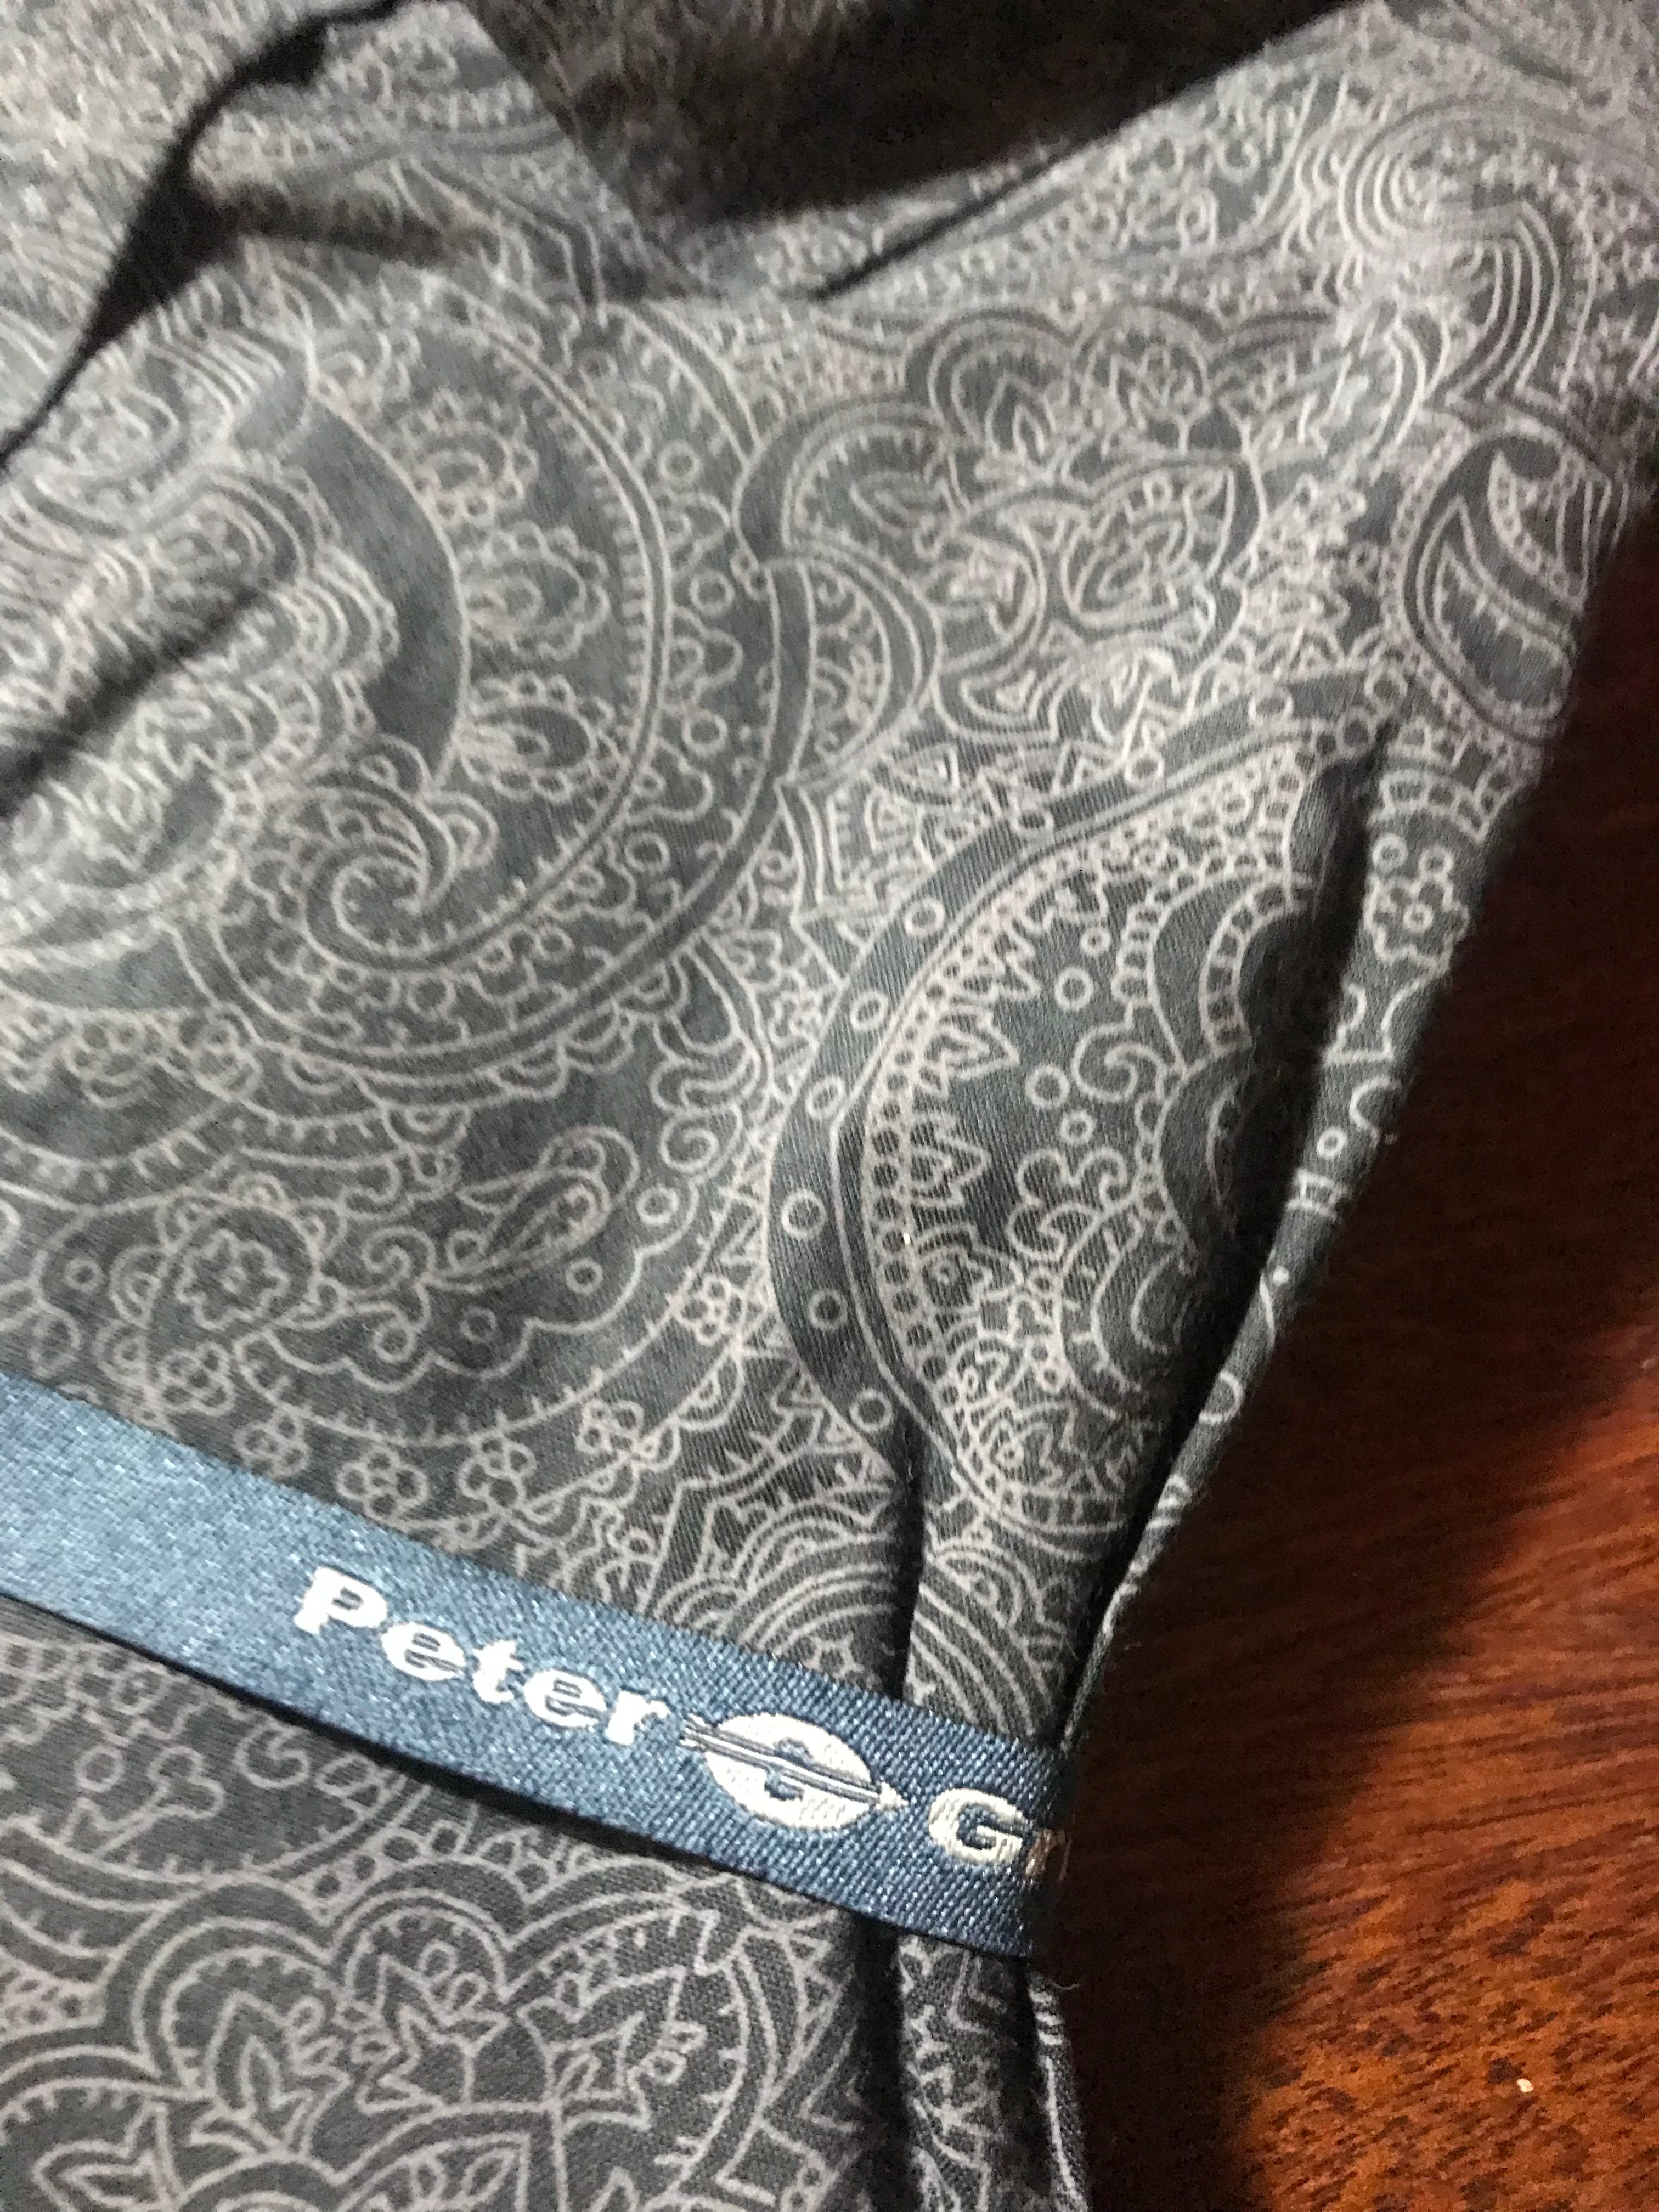 Peter Gribby King-Size Charcoal Paisley Patterned Men's Shirt